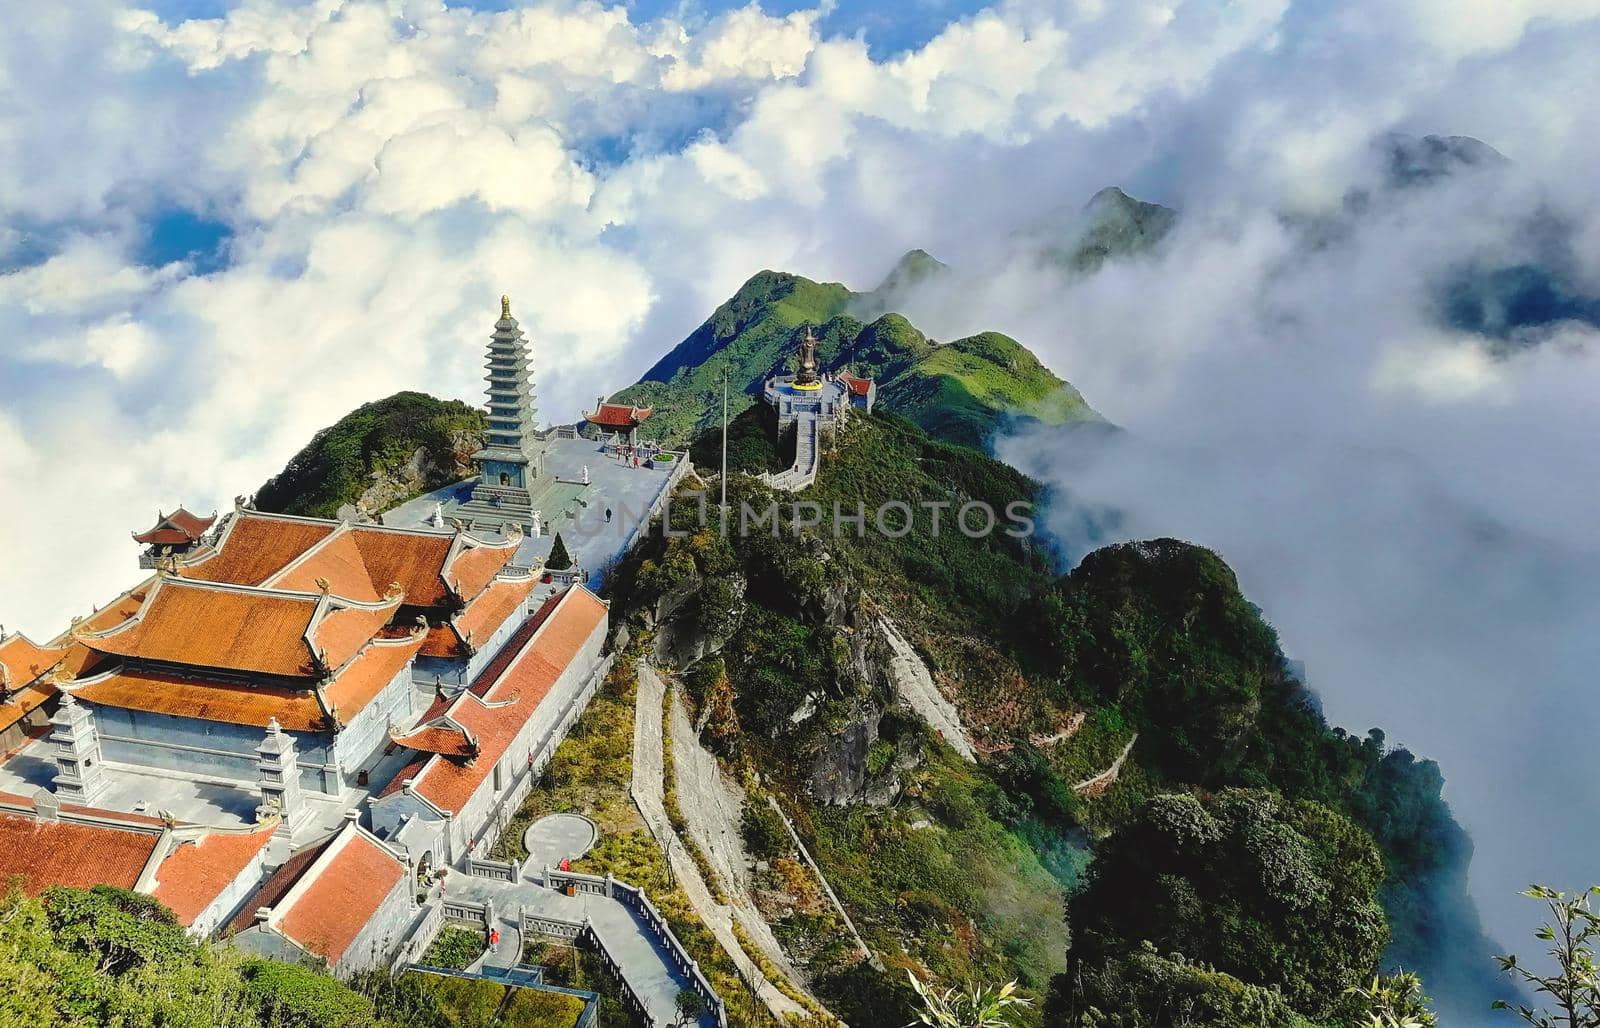 Stunning aerial view of the temples on Fansipan mountain in the Lào Cai province in Vietnam